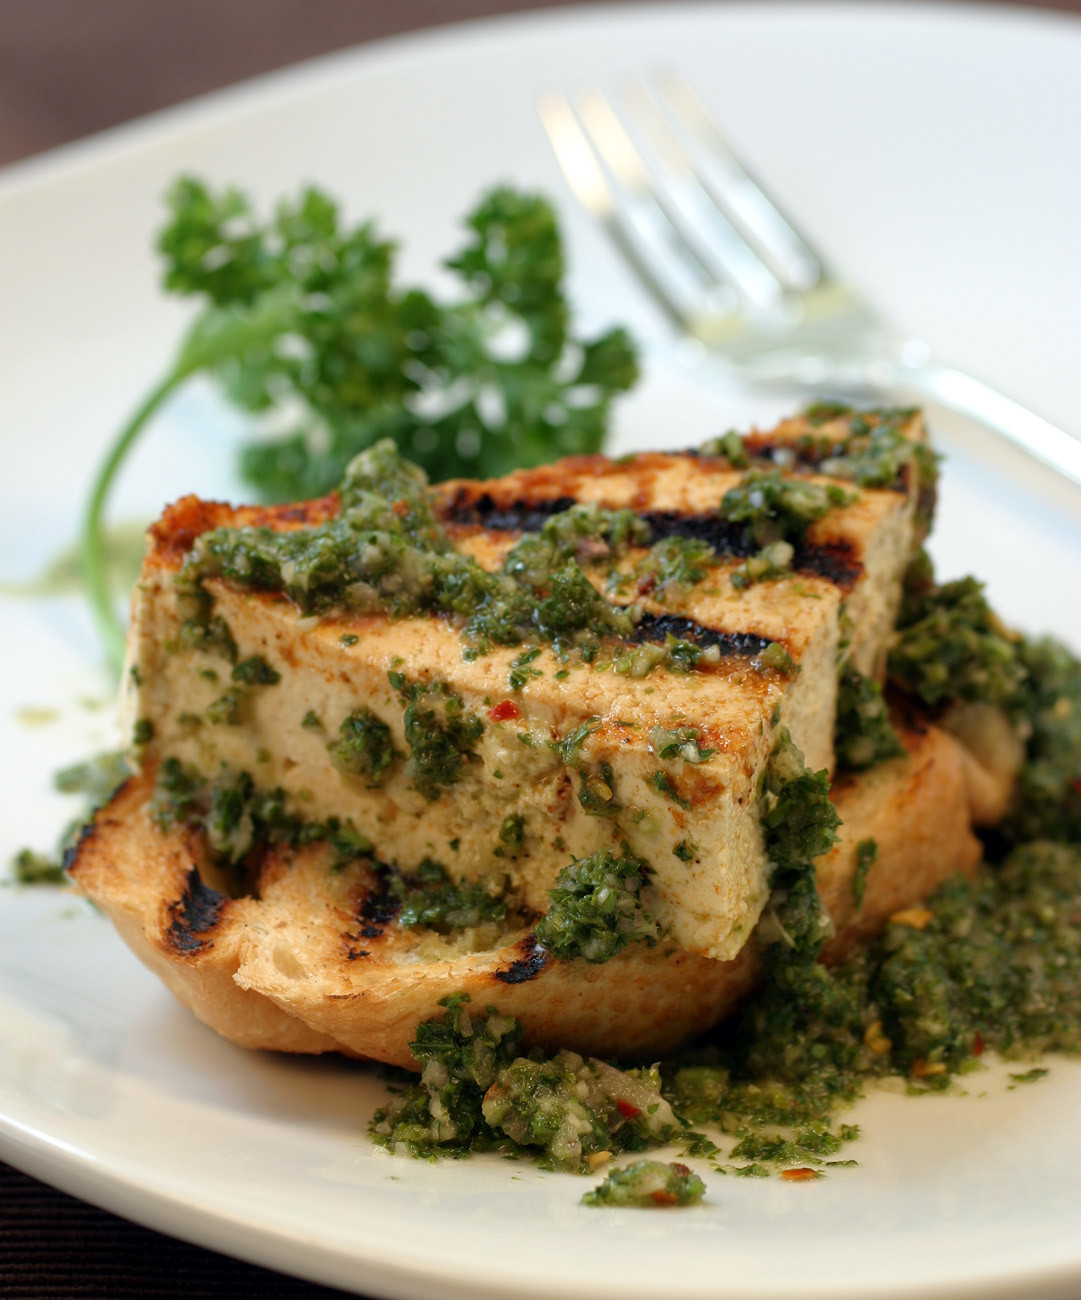 Grilled Tofu Recipes
 Grilled Tofu with Chimichurri Sauce and Garlic Bread